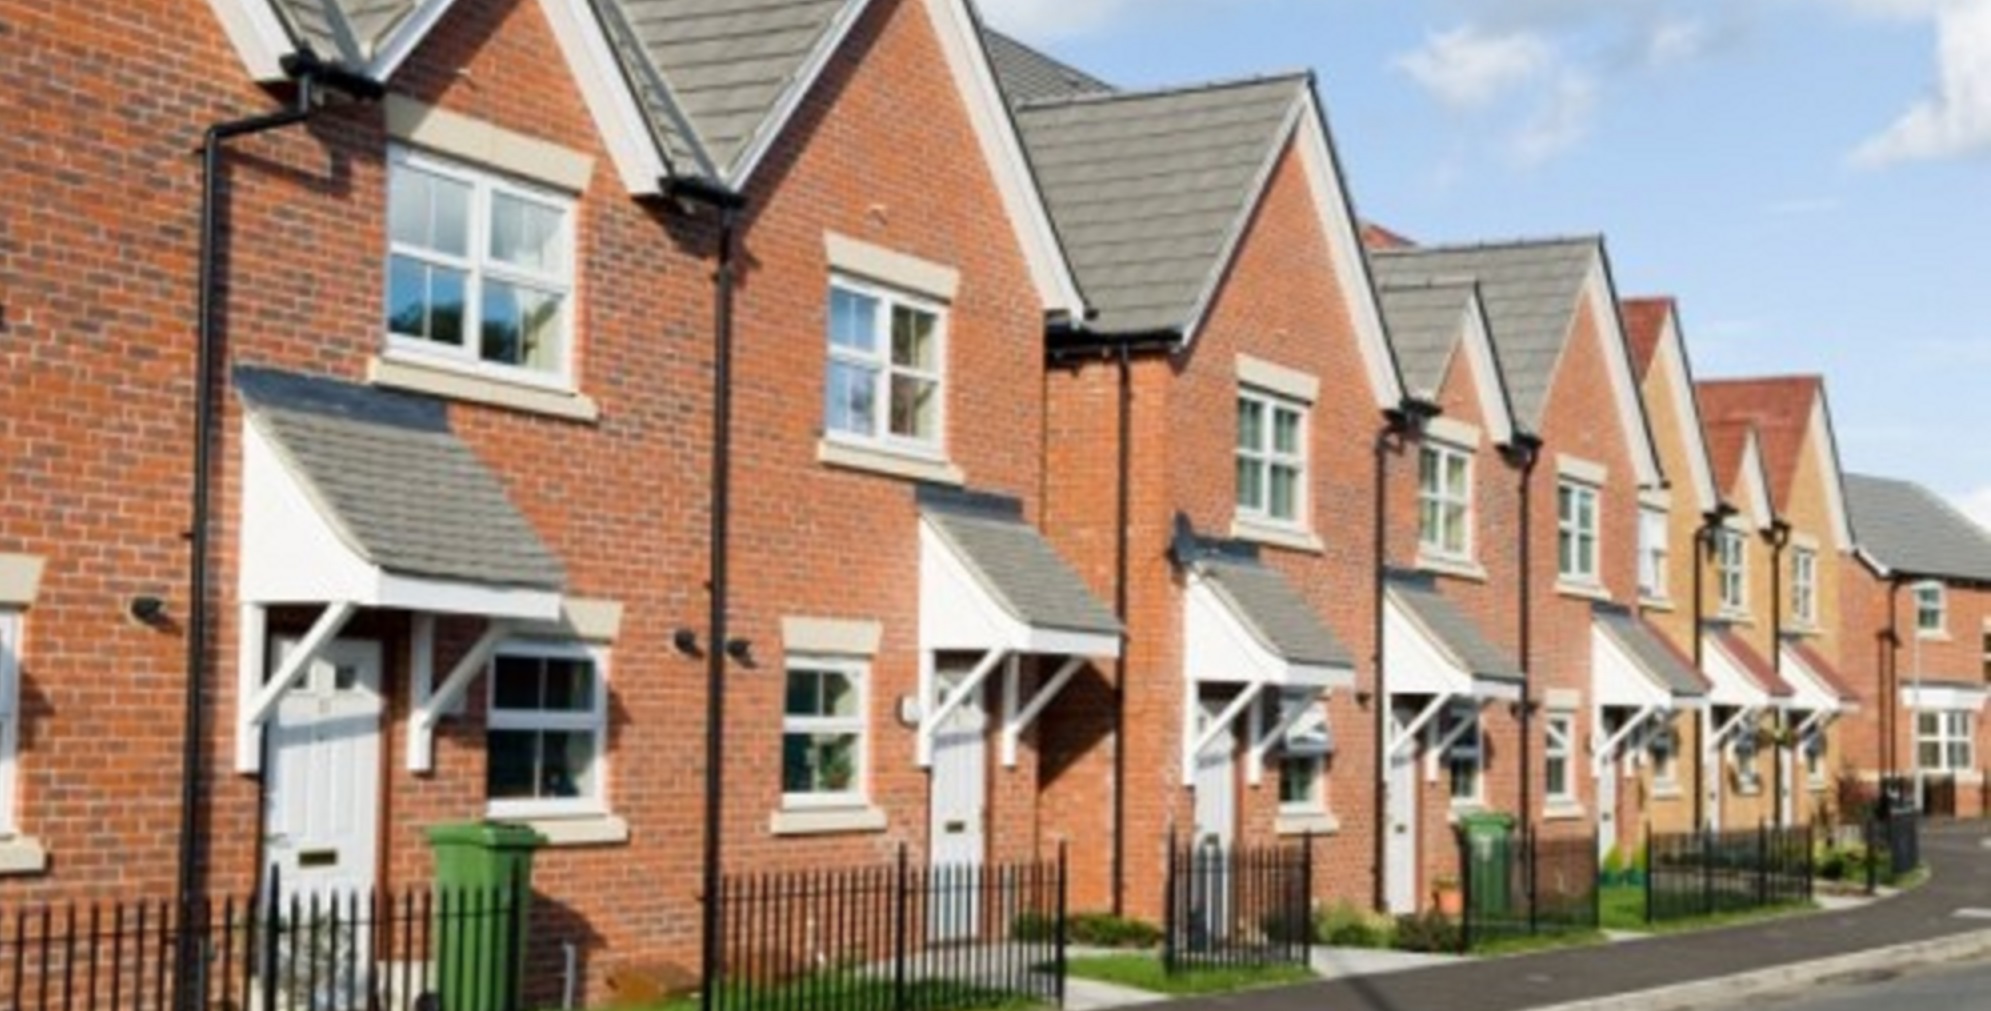 House prices soared 14% in the last 12 months, how far will they fall? - https://roomslocal.co.uk/blog/house-prices-soared-14-in-the-last-12-months-how-far-will-they-fall #prices #soared #last #months #will